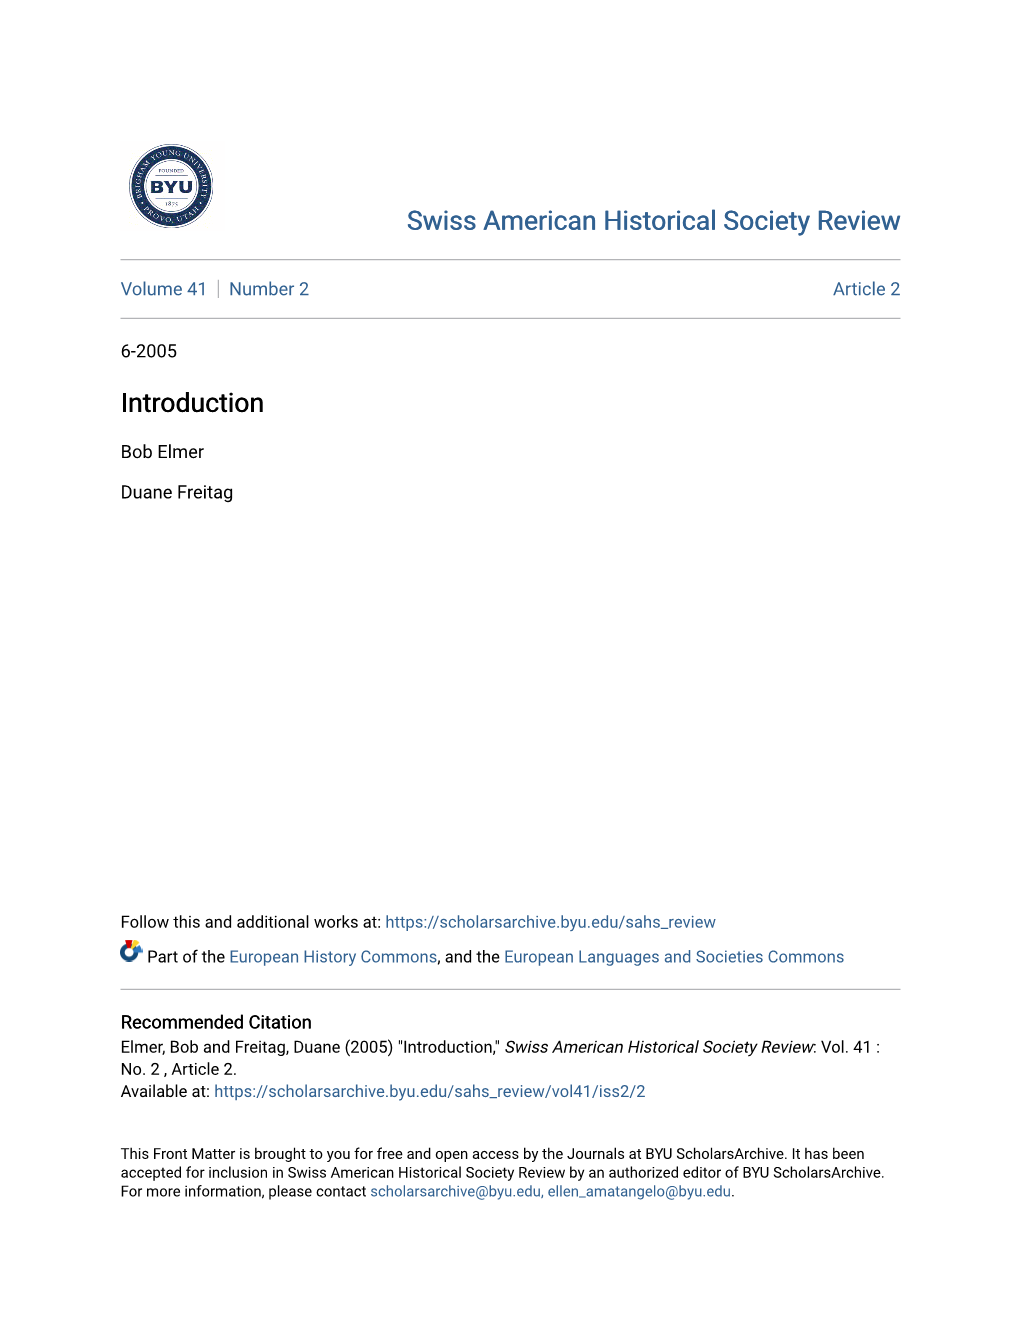 Swiss American Historical Society Review Introduction